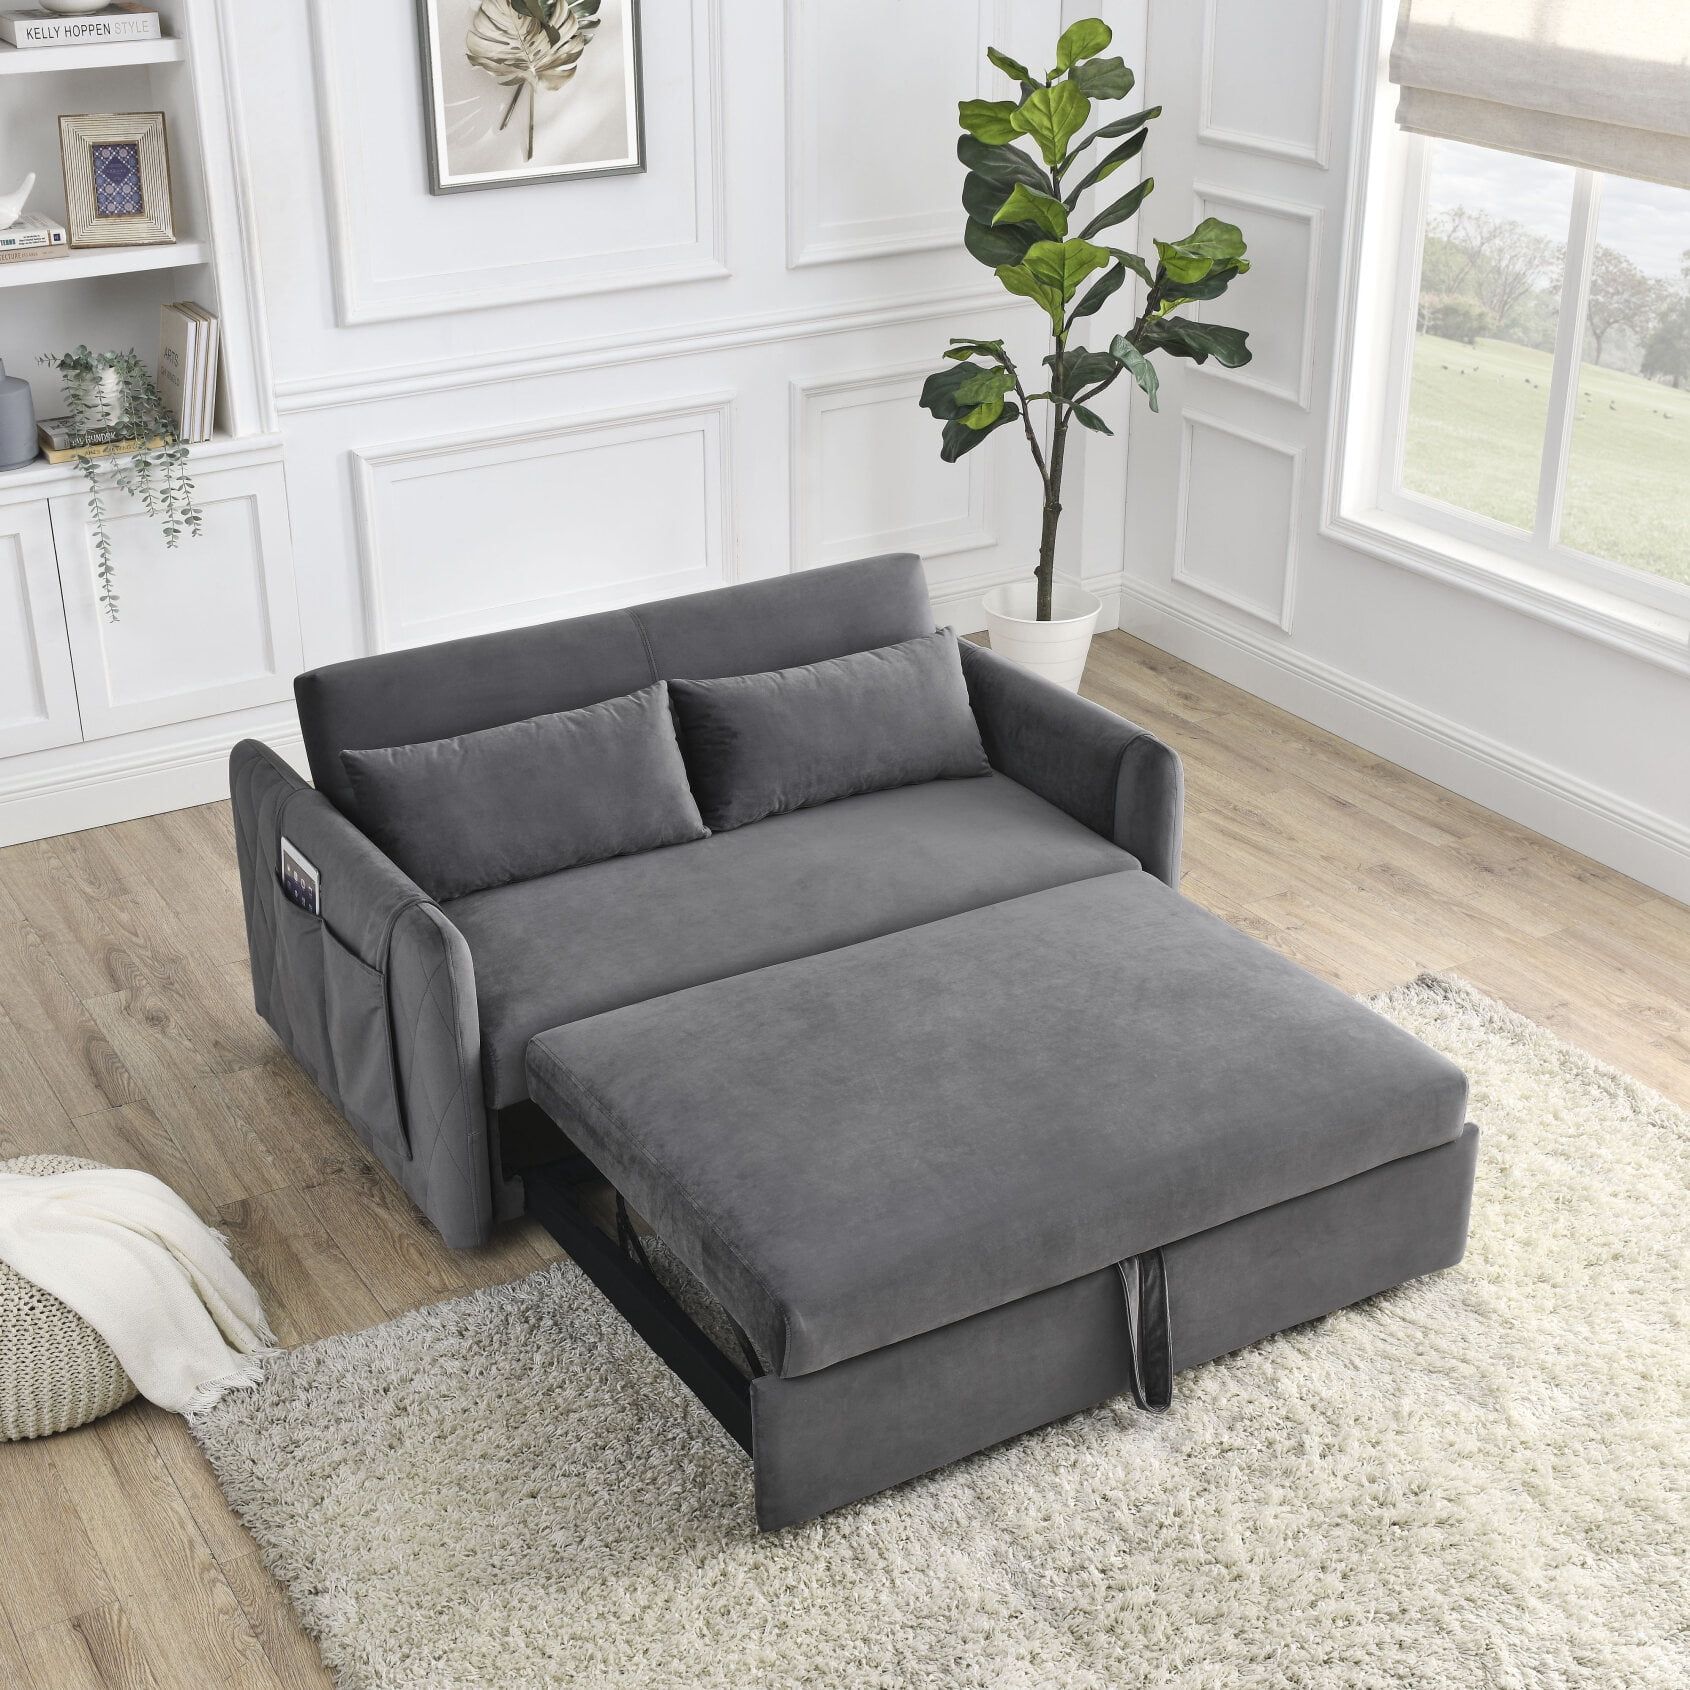 3 In 1 Convertible Sleeper Sofa Bed, Upholstered Pull Out Sofa With 2  Detachable Arm Pockets, Futon Sofa Bed With 2 Pillows And Adjustable  Backrest For Apartment Living Room – Walmart With 3 In 1 Gray Pull Out Sleeper Sofas (Photo 15 of 15)